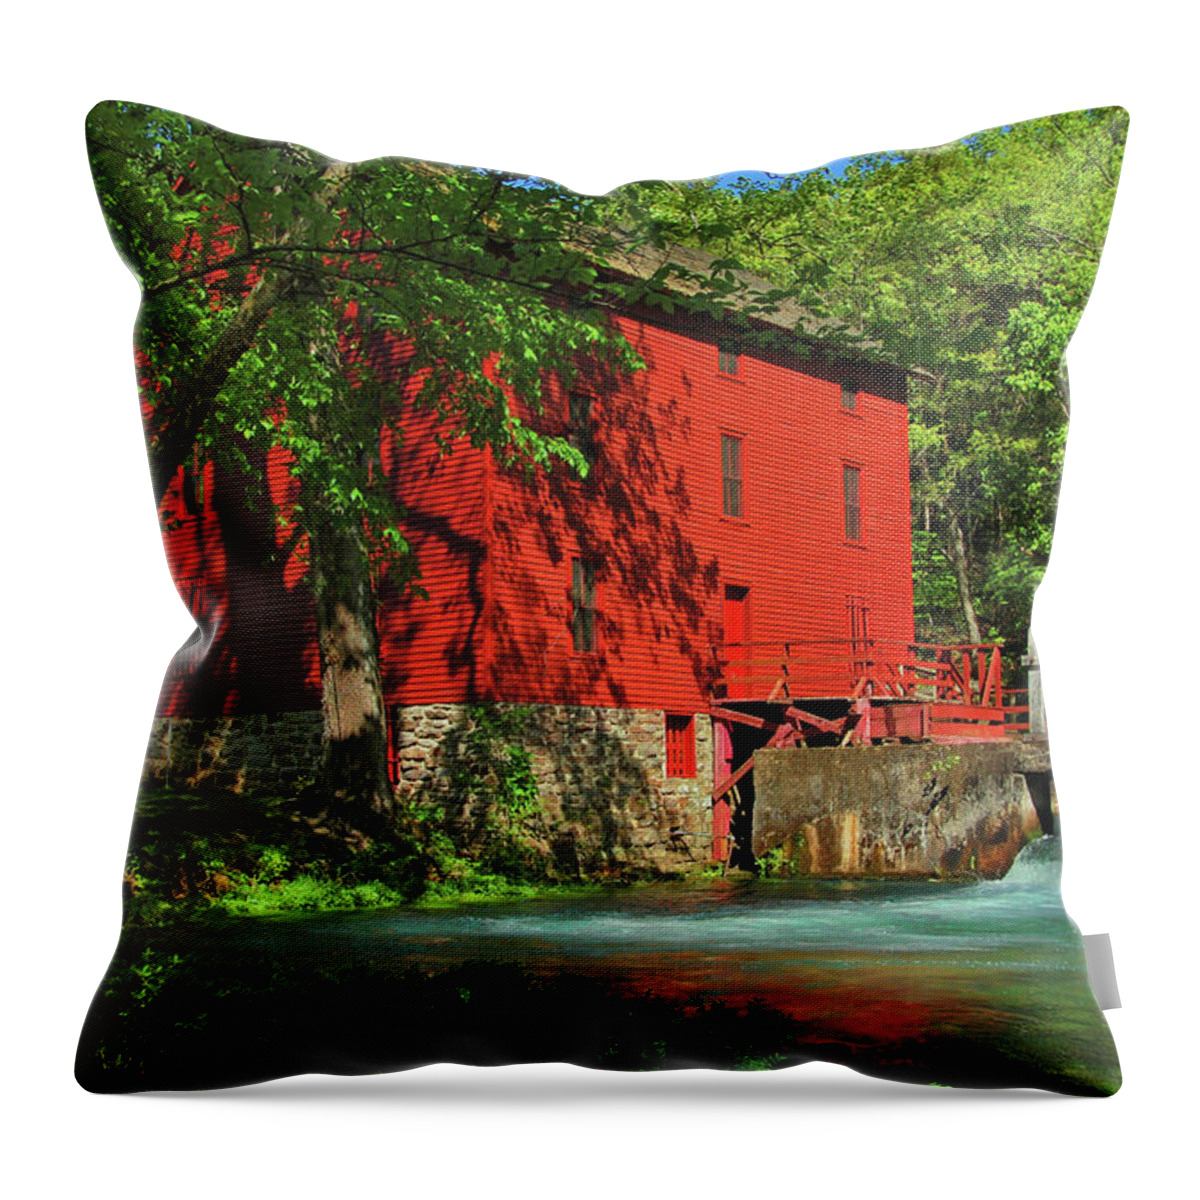 Alley Spring Mill Throw Pillow featuring the photograph Alley Spring Mill by Ben Prepelka